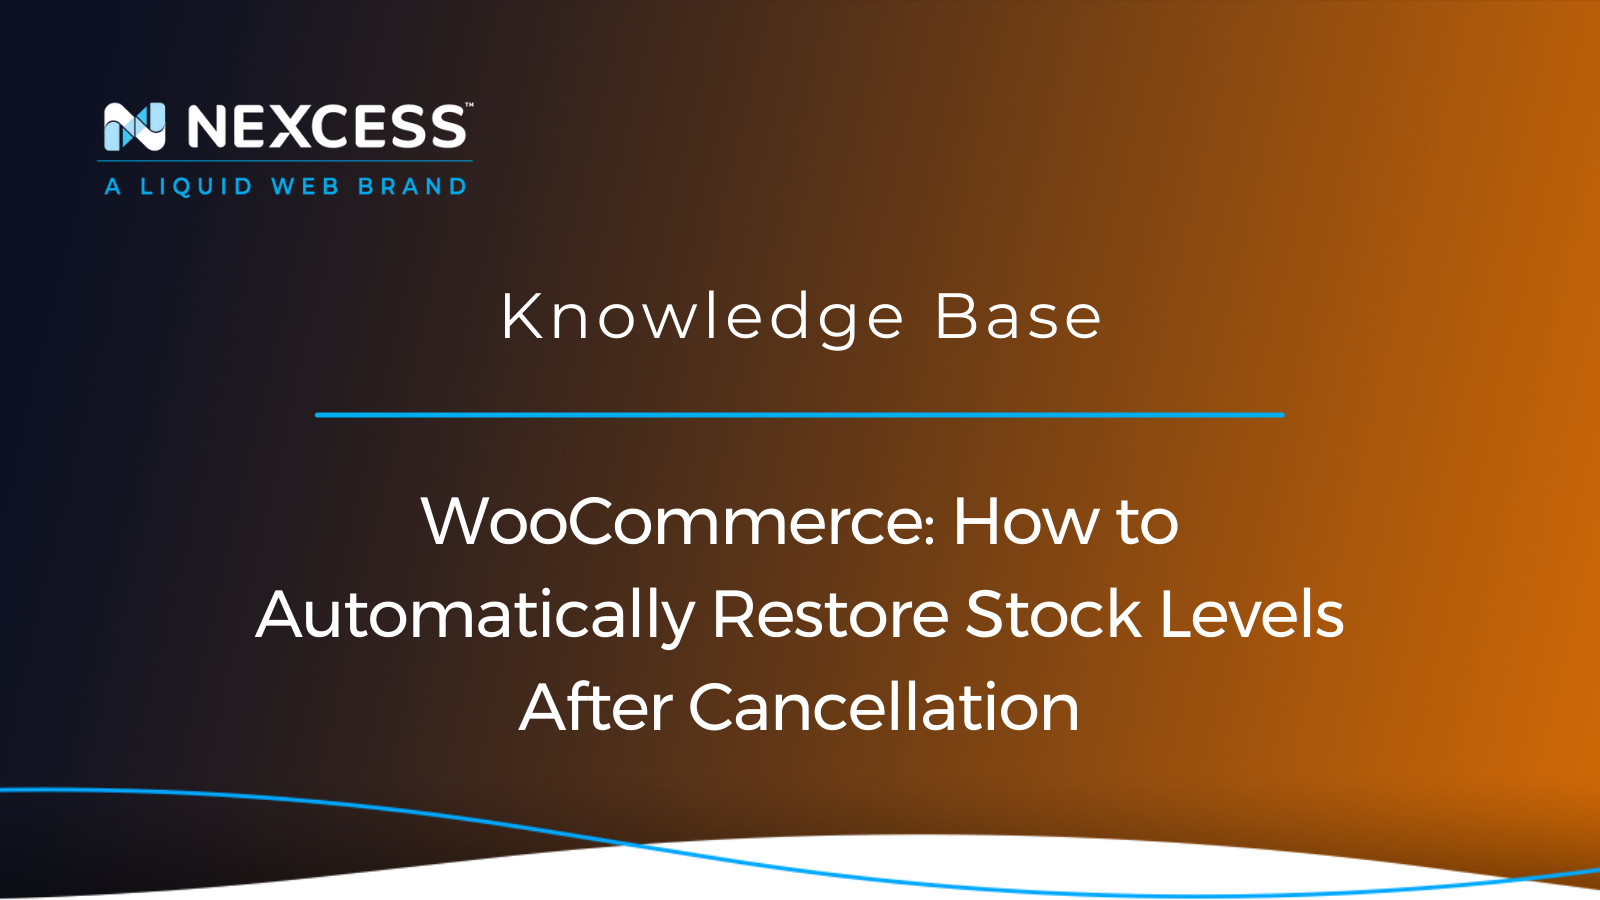 WooCommerce: How to Automatically Restore Stock Levels After Cancellation